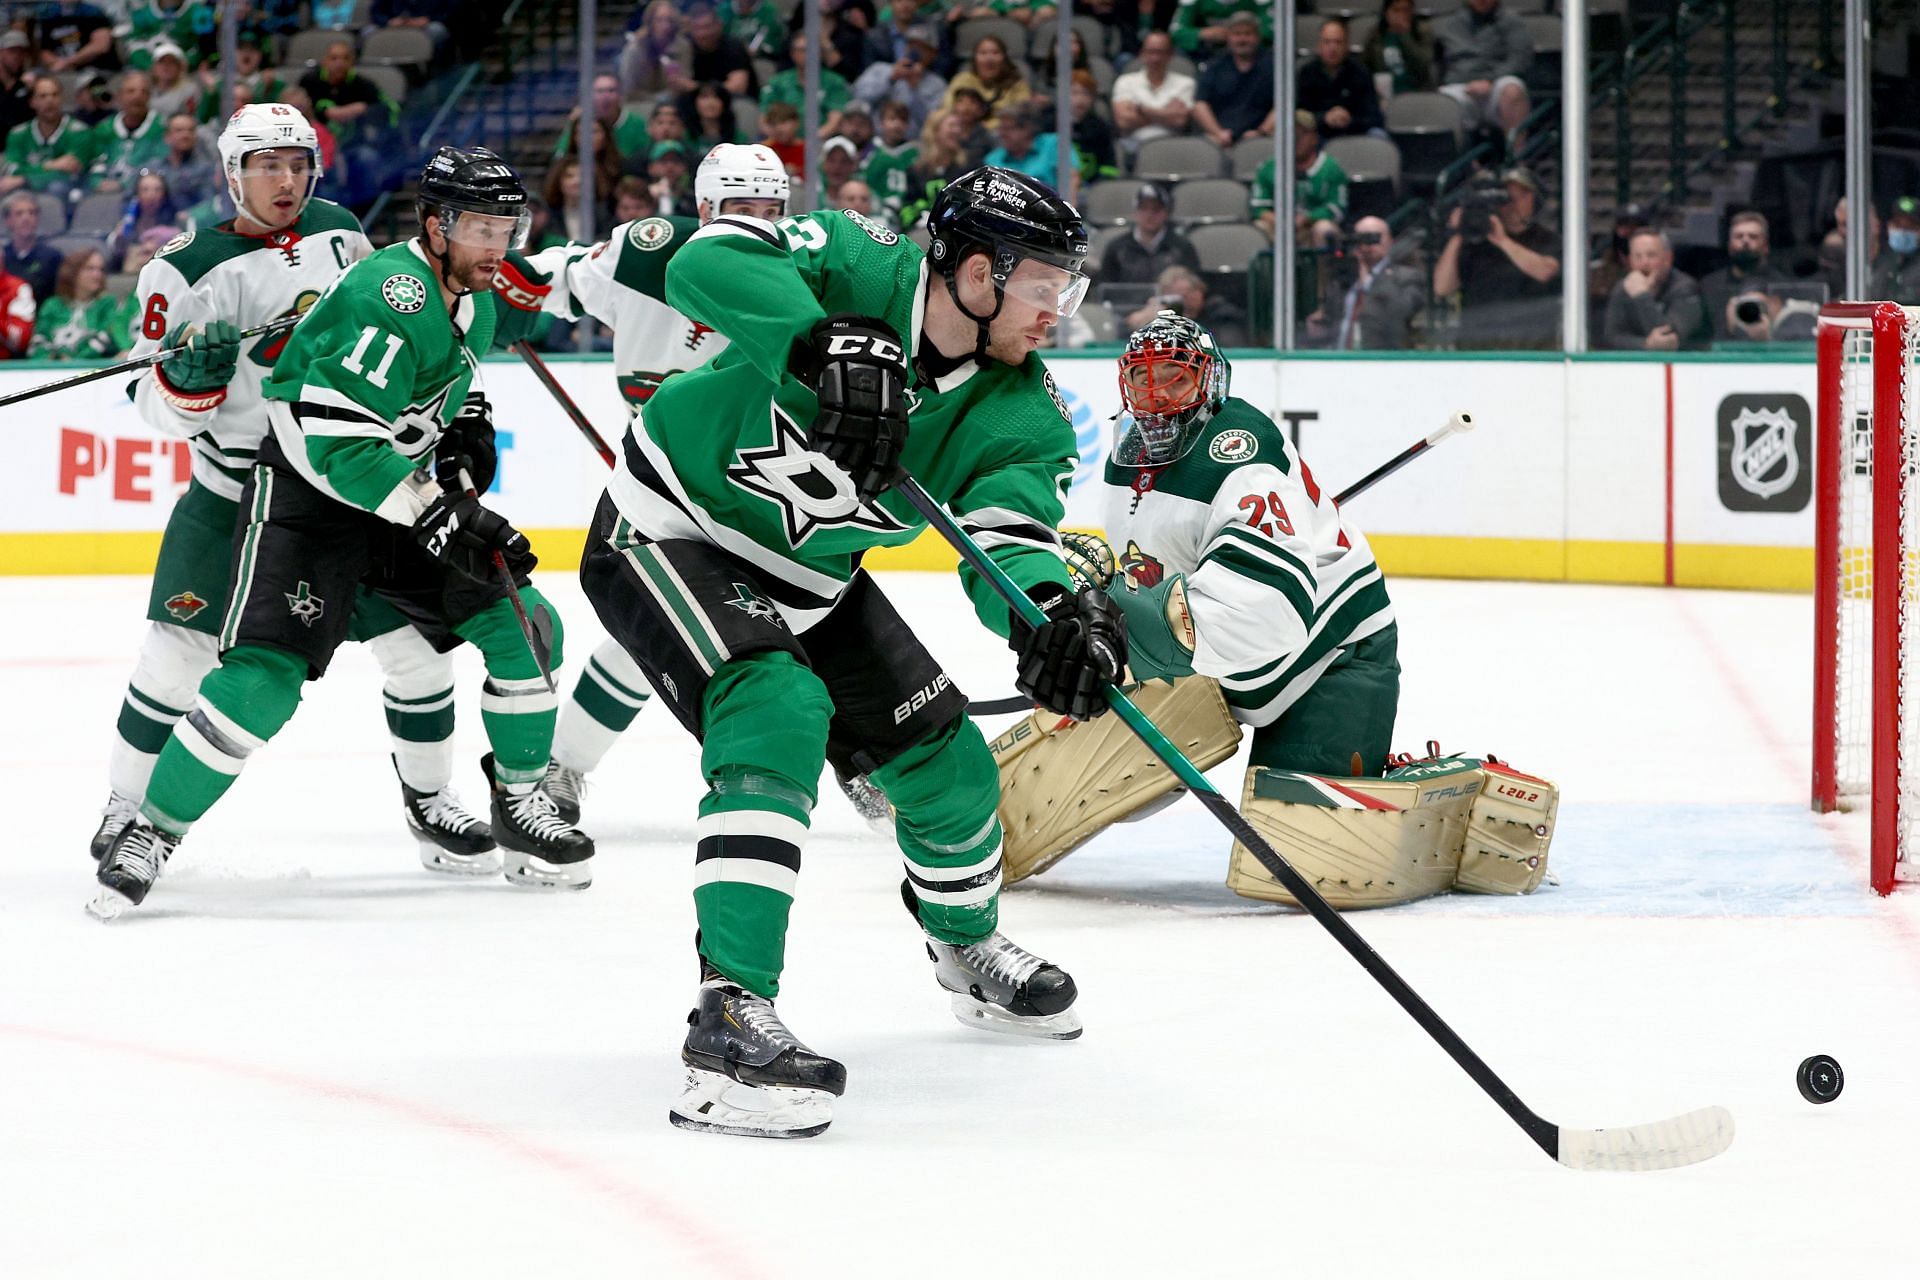 Dallas Stars vs Minnesota Wild Series How to watch, TV Channel list, Live stream details and more